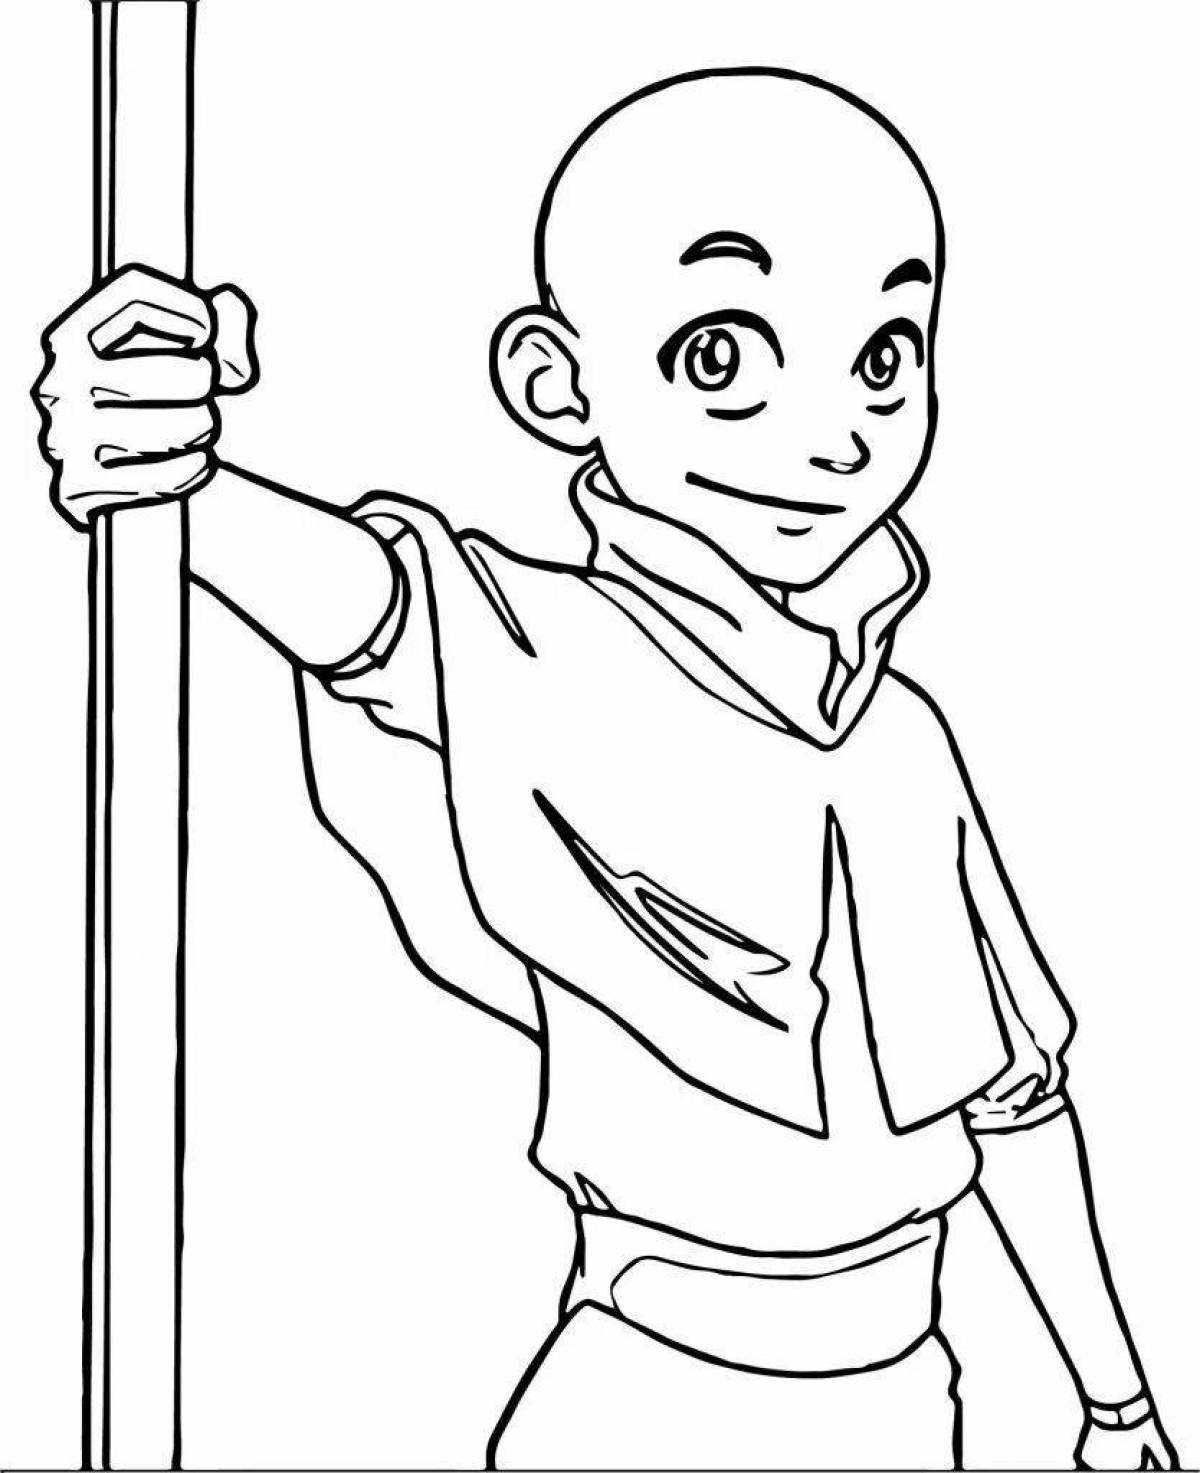 Aang colorful coloring page